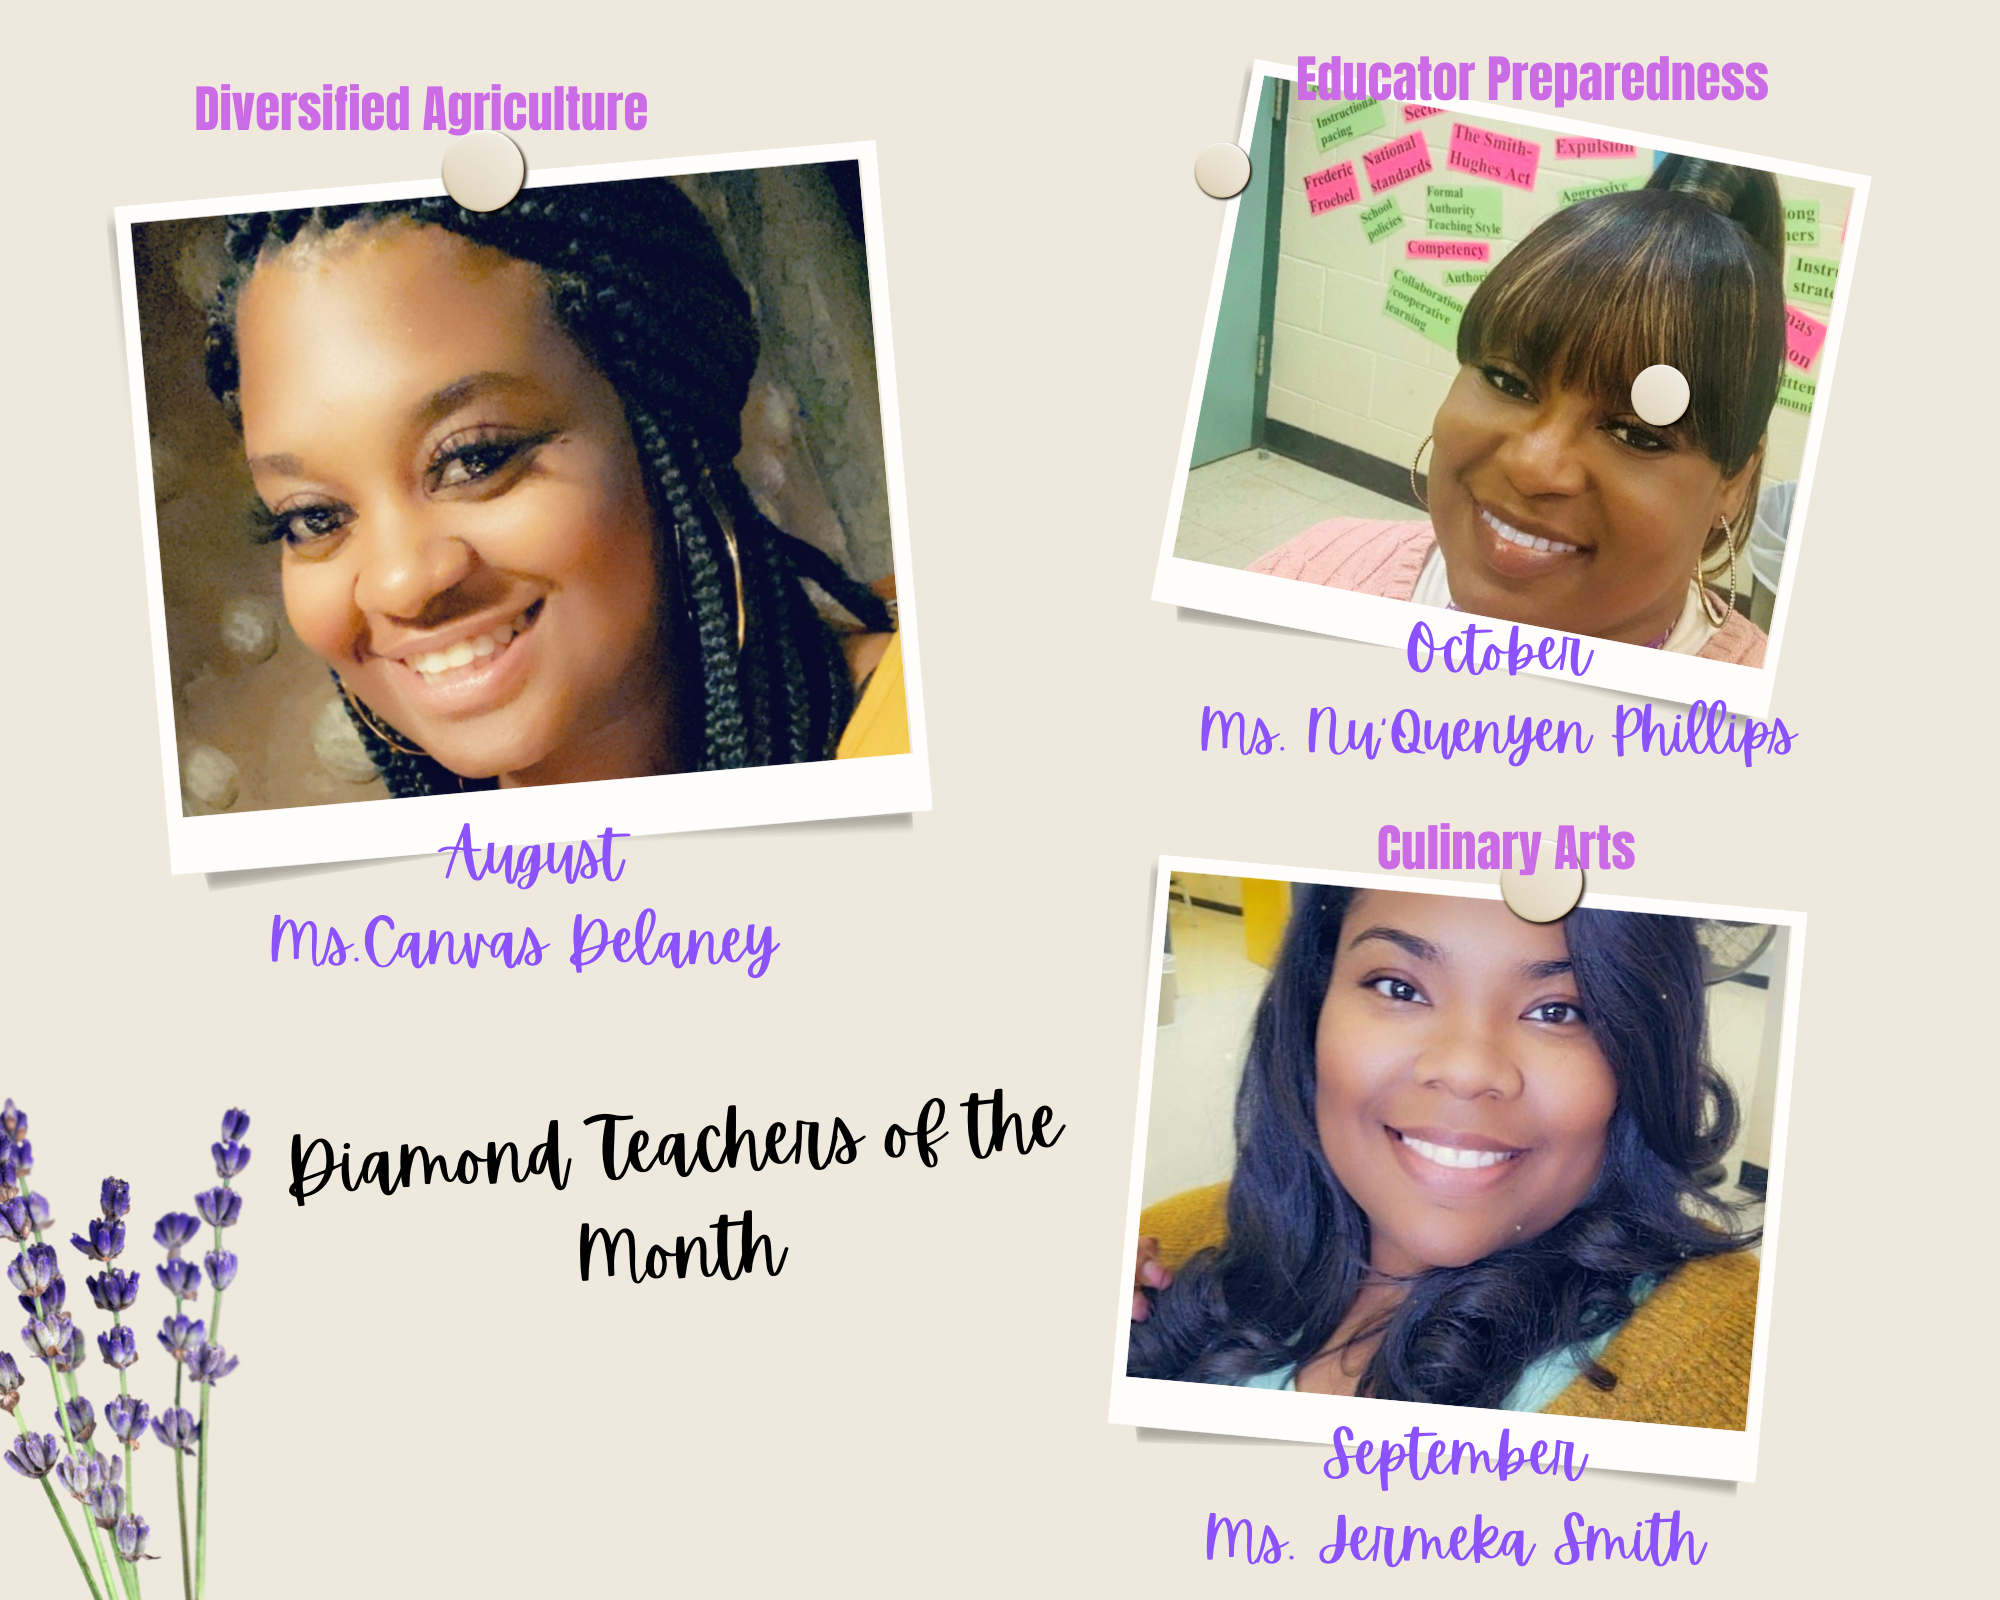 Diamond Teachers of the months of August is Ms. Canvas Delaney. Diversified Agriculture, September, Ms. Jermeka Smith Culinary Arts and October. Ms. Nu'Quenyen Phillips